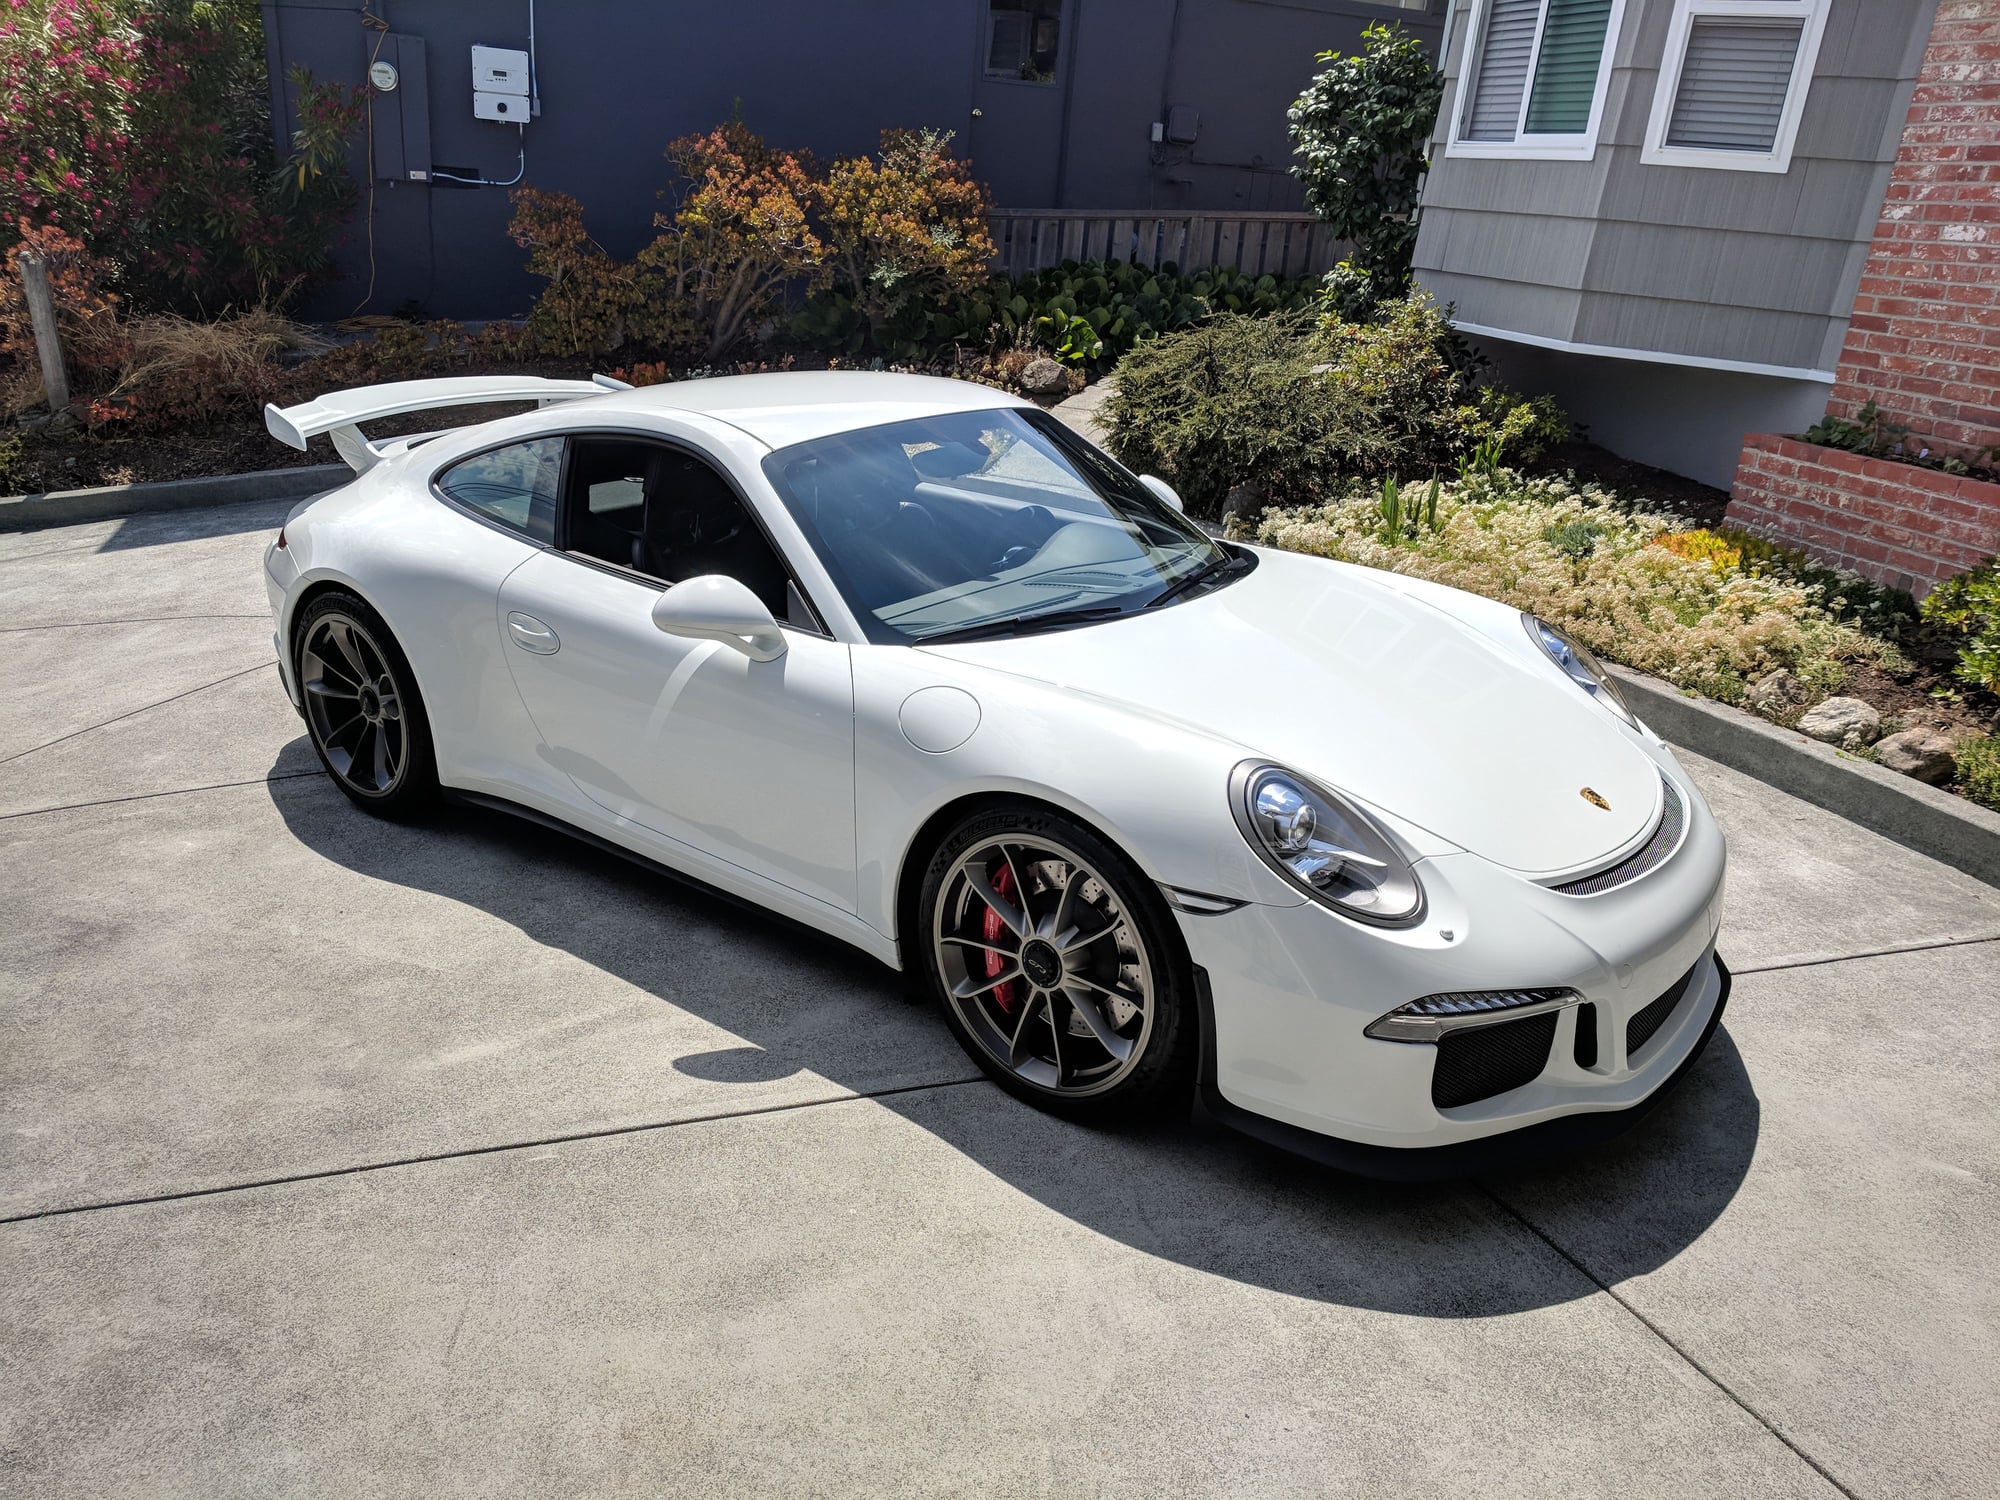 Wheels and Tires/Axles - WTT: Silver 991 GT3 Wheels for Black Wheels - Used - 2013 to 2019 Porsche GT3 - San Francisco, CA 94107, United States